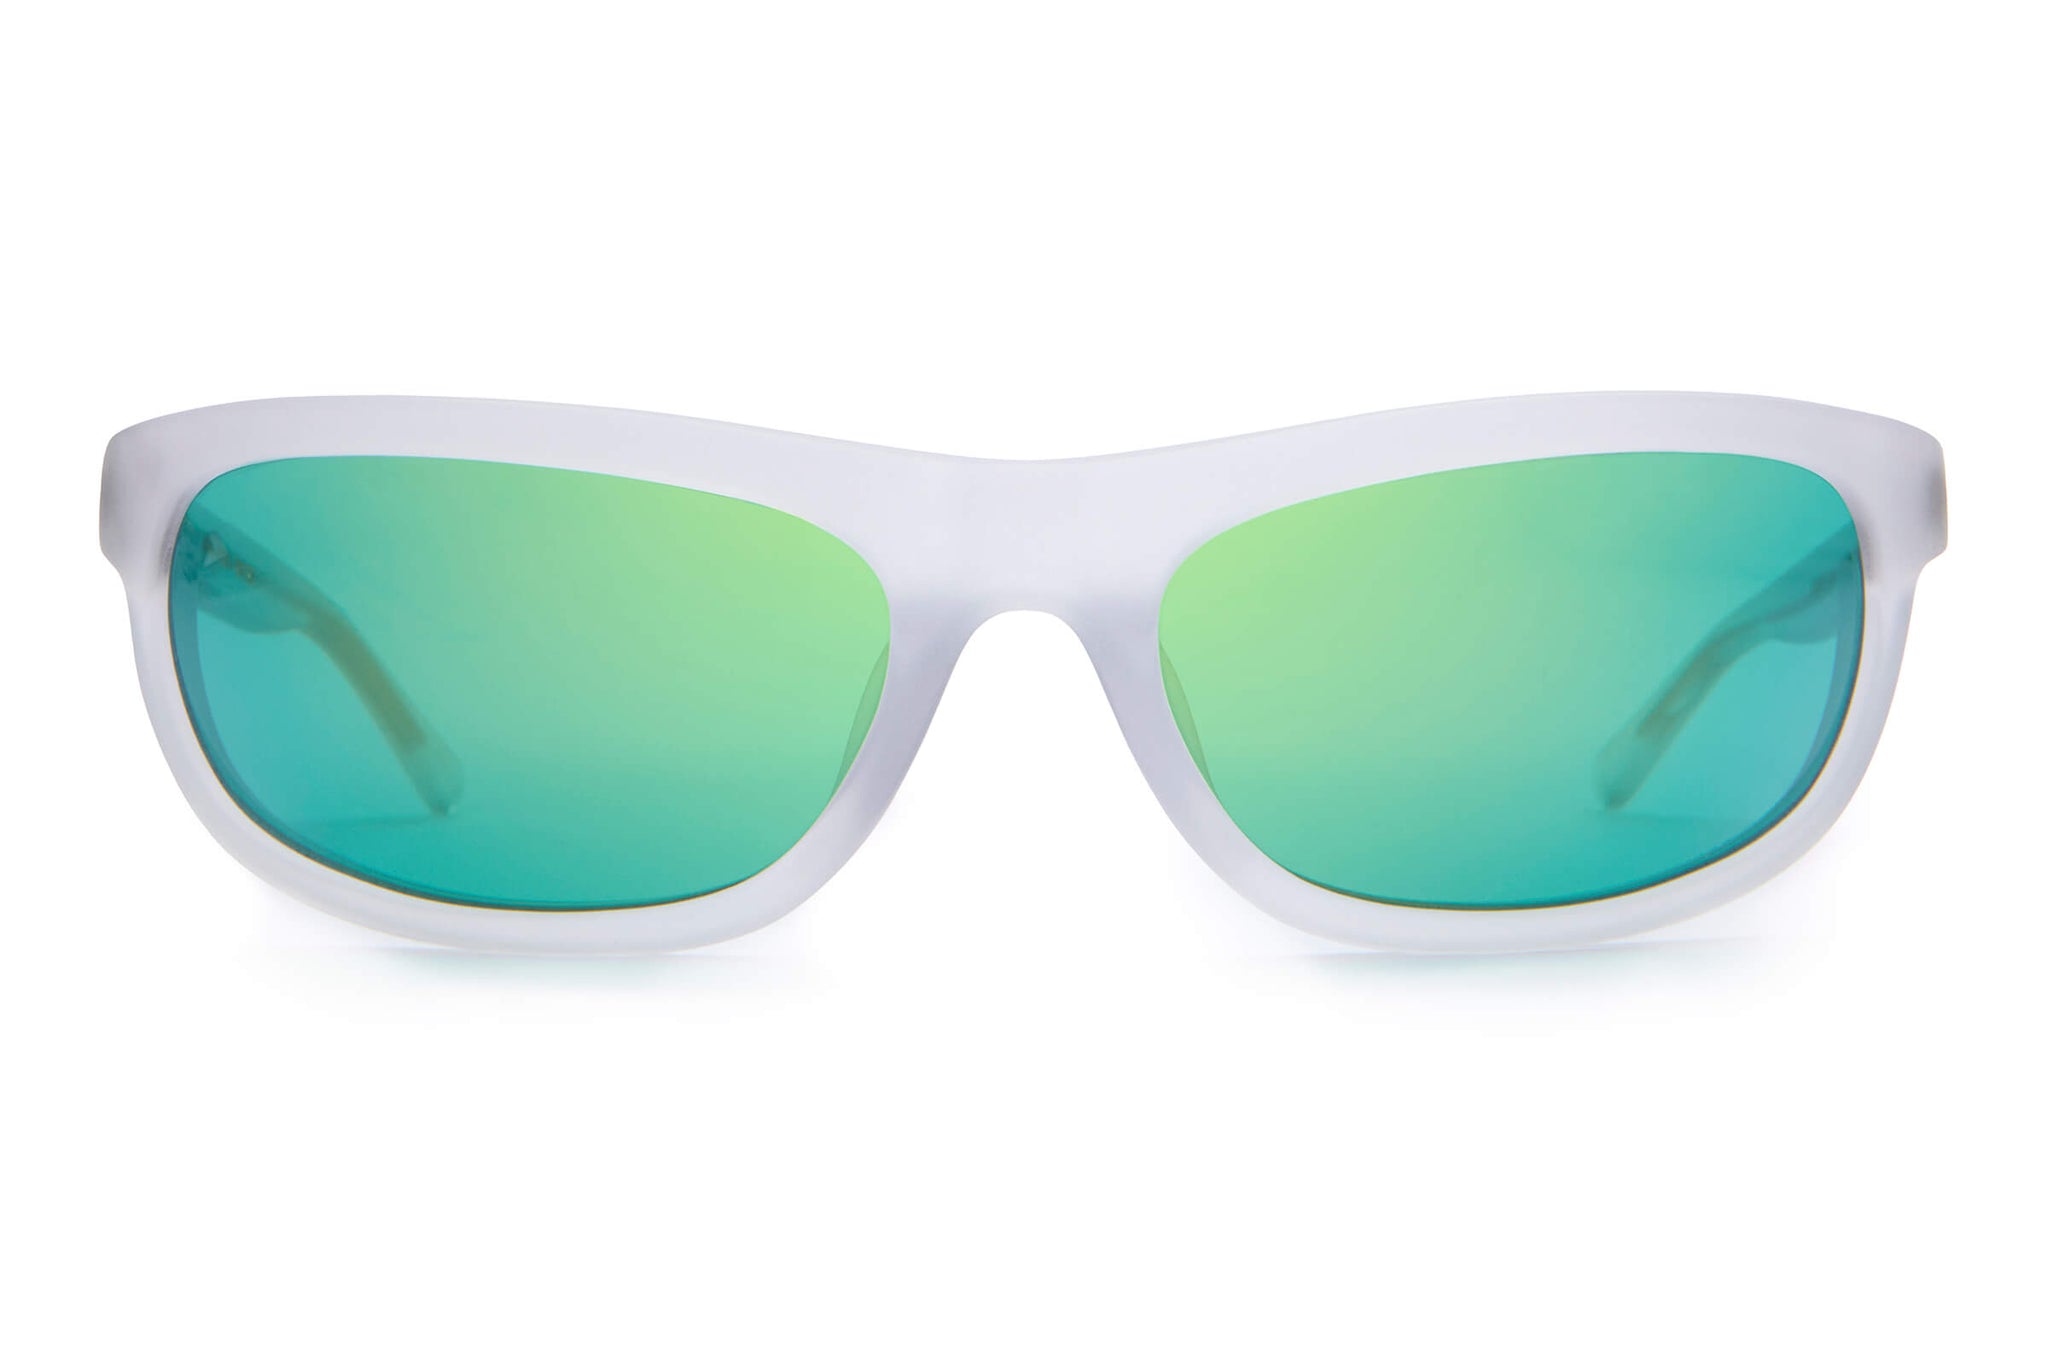 Eco-Friendly Bio-Acetate Biodegradable eyewear inspired by the